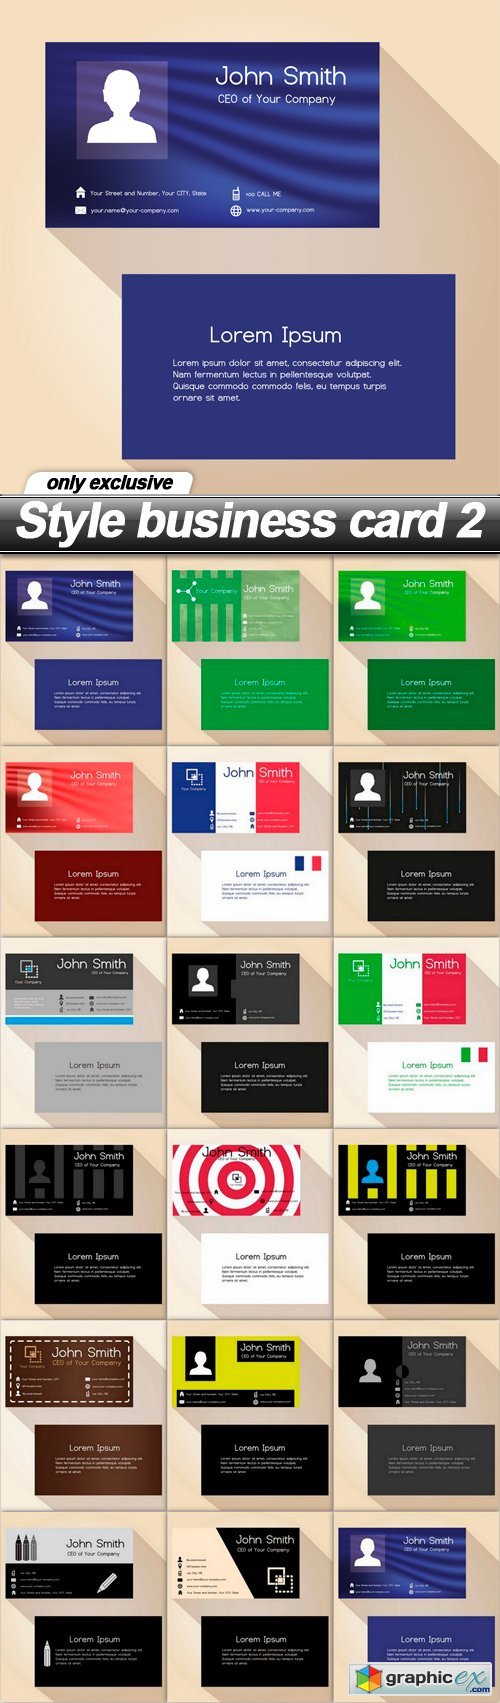 Style business card 2 - 17 EPS